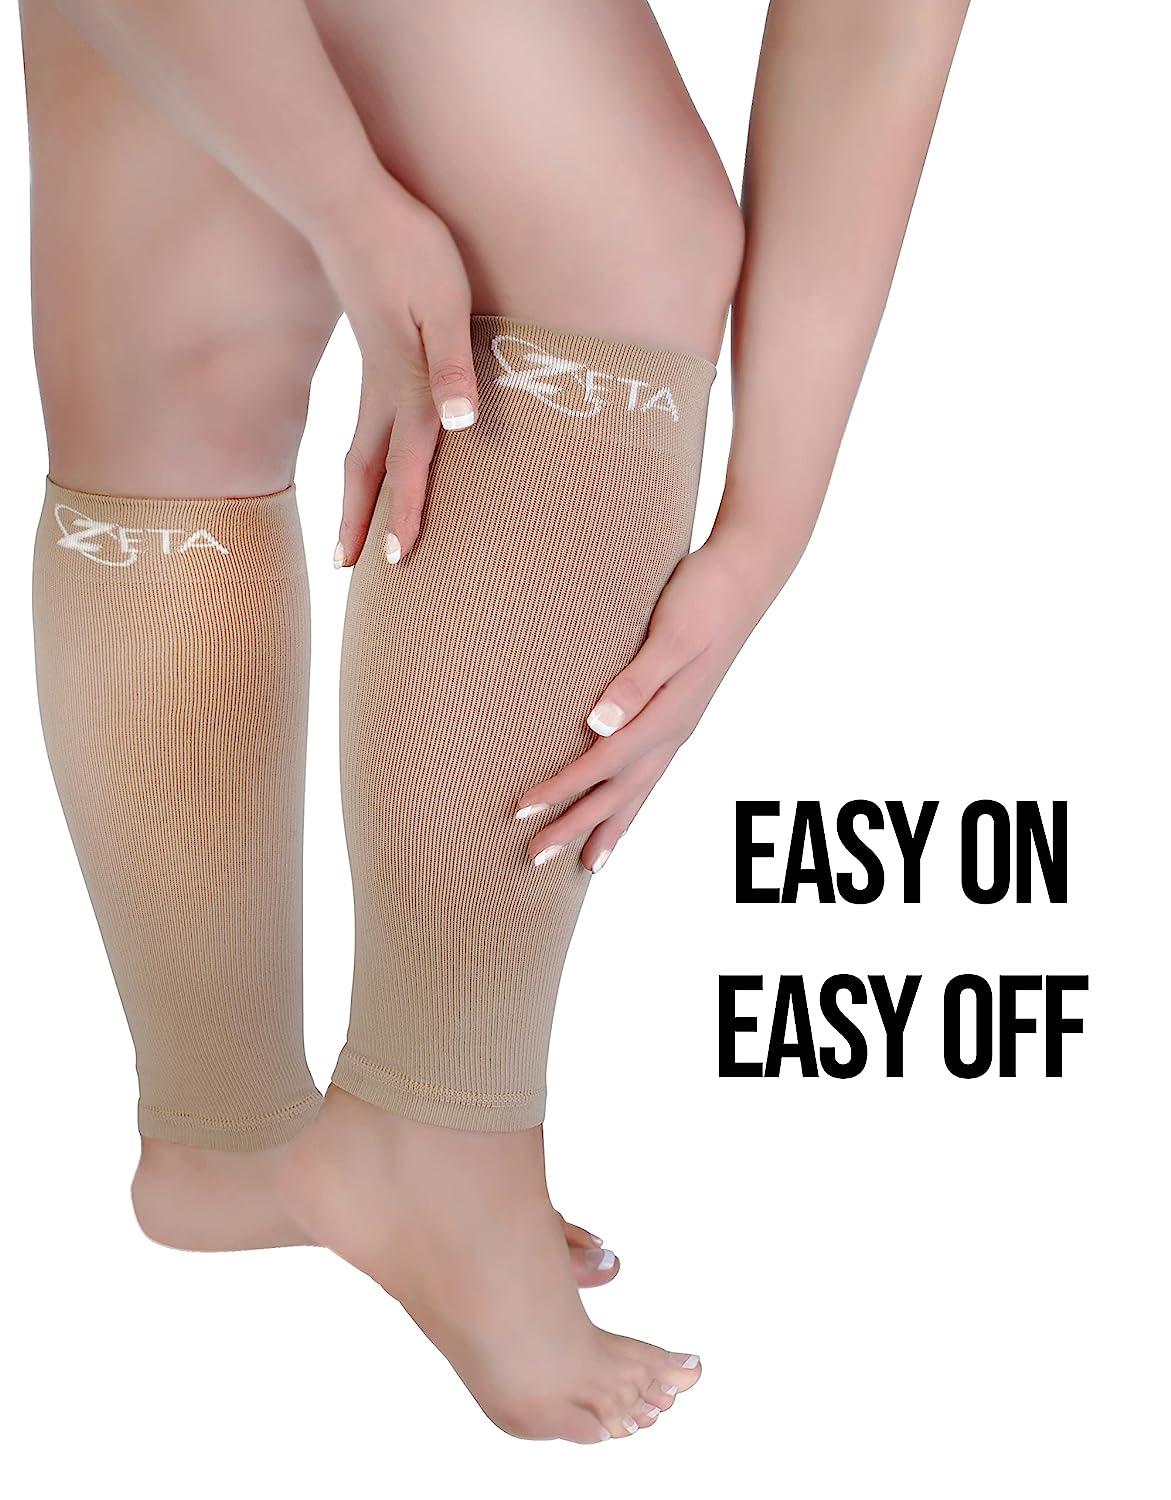 Zeta Plus Size Short Length Leg Sleeve Support Socks - The Wide Calf  Compression Sleeve Women Love for Its Amazing Fit, Cotton-Rich Comfort, Graduated  Compression & Soothing Relief, 1 Pair, 2XL, Nude